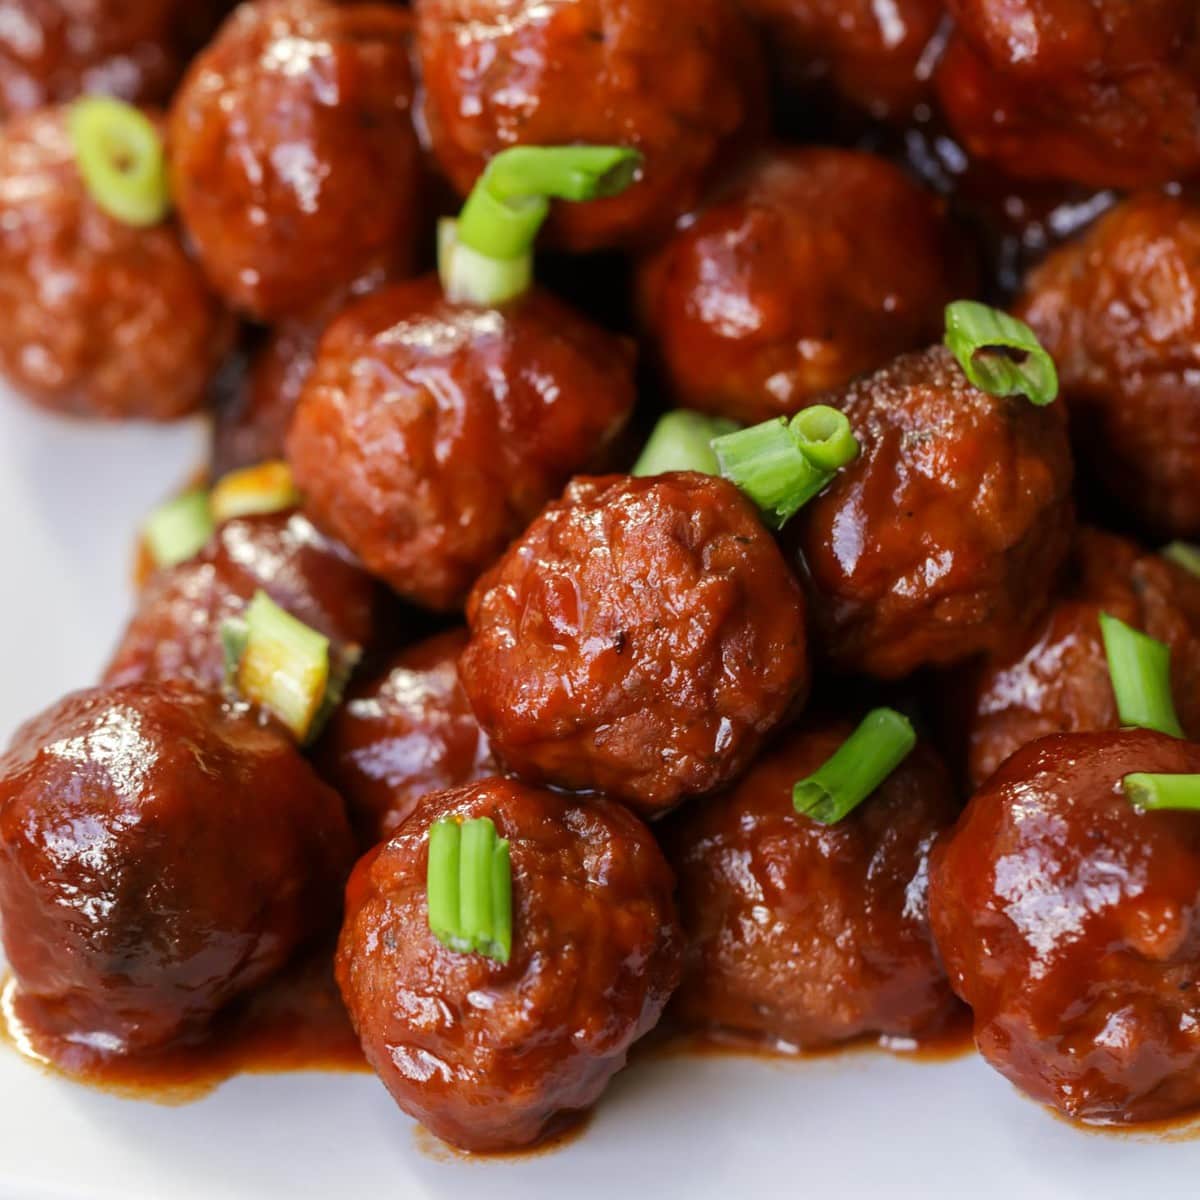 Halloween dinner ideas - a pile of grape jelly meatballs garnished with green onions,